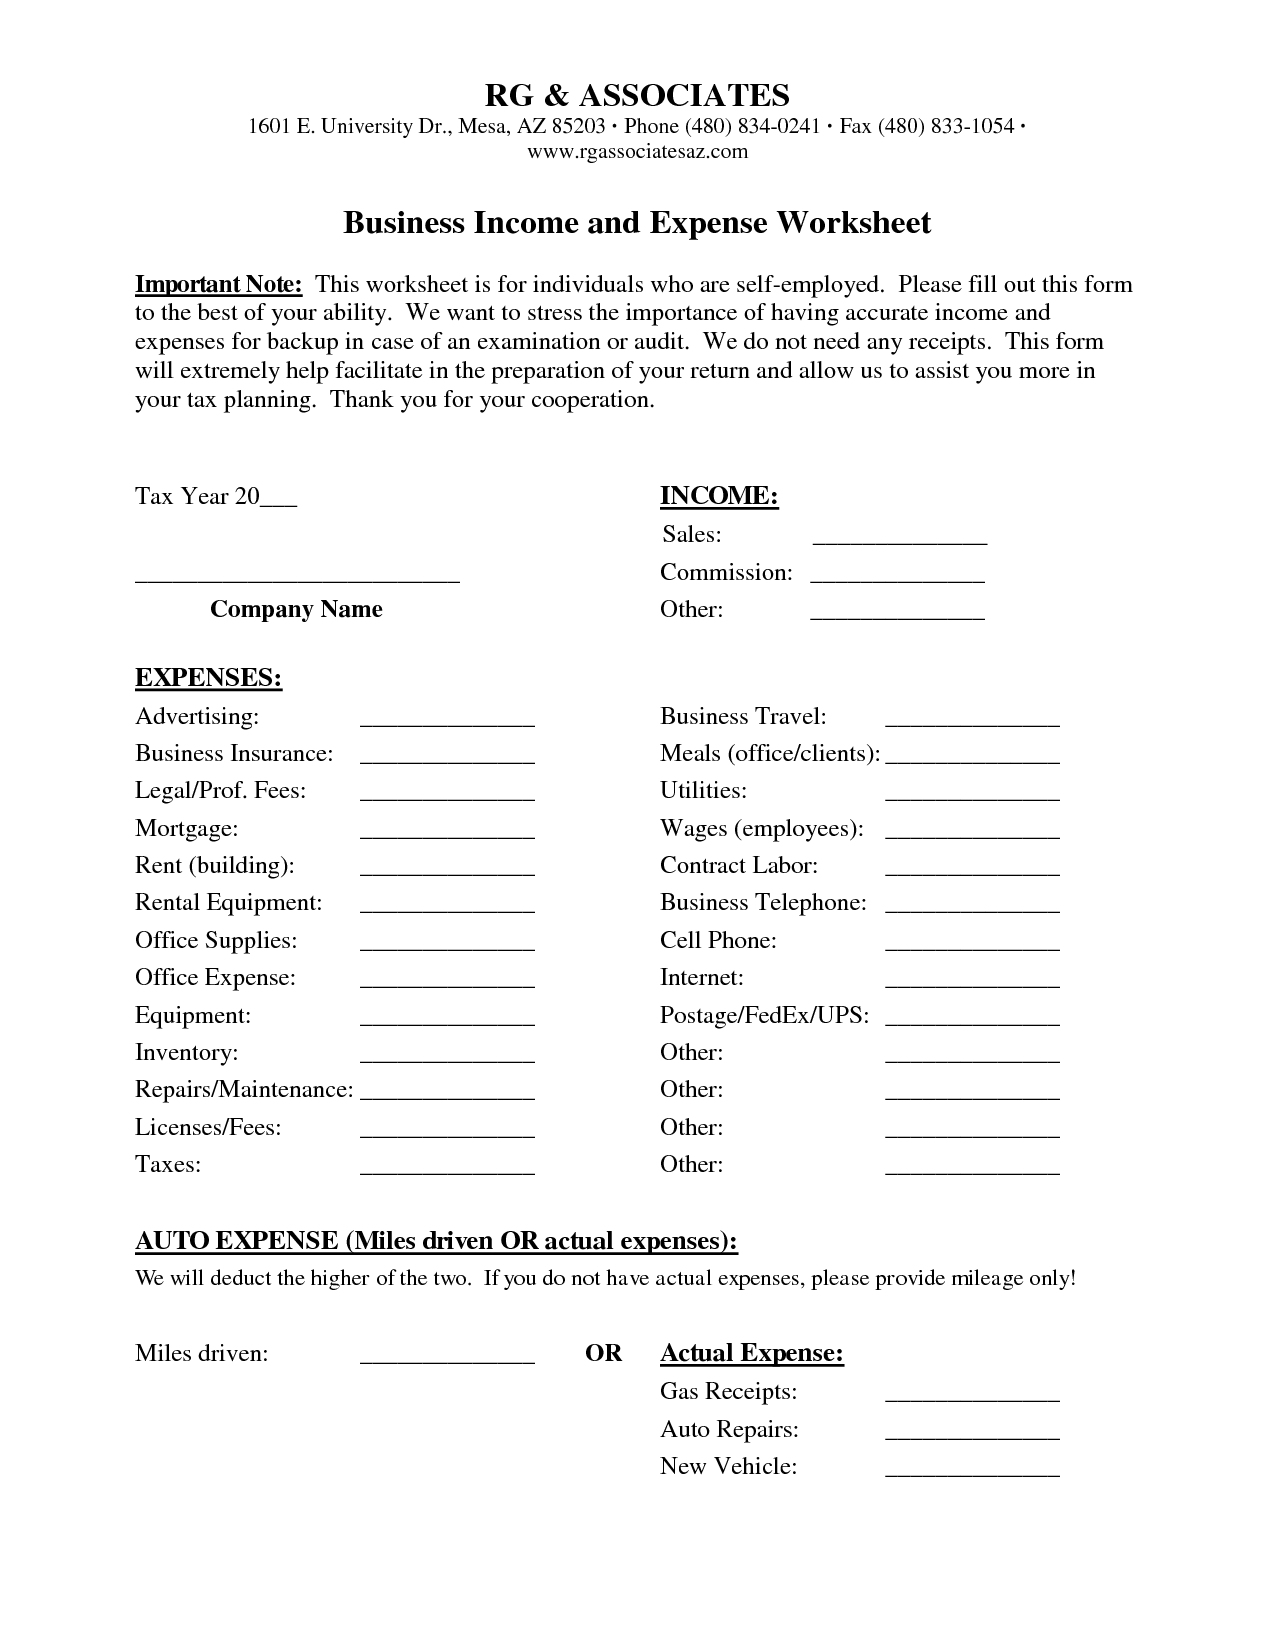 iso-business-income-worksheet